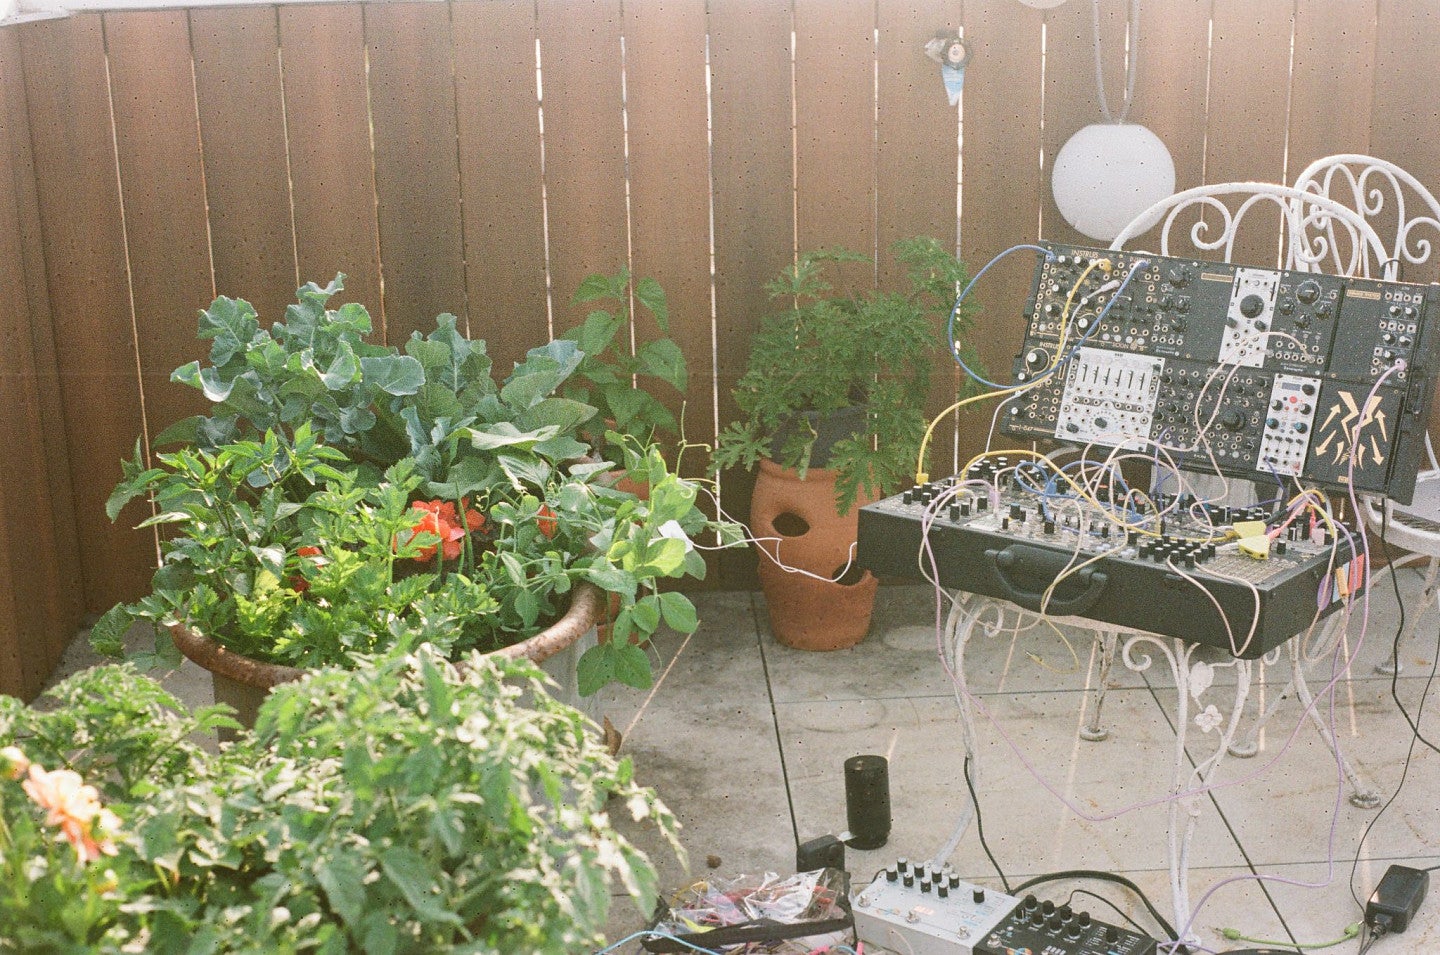 Photograph of a backyard garden with a wire sculpture/bench featured on the right hand side of the photo. On the left is a collection of greenery including terra cotta planters. 